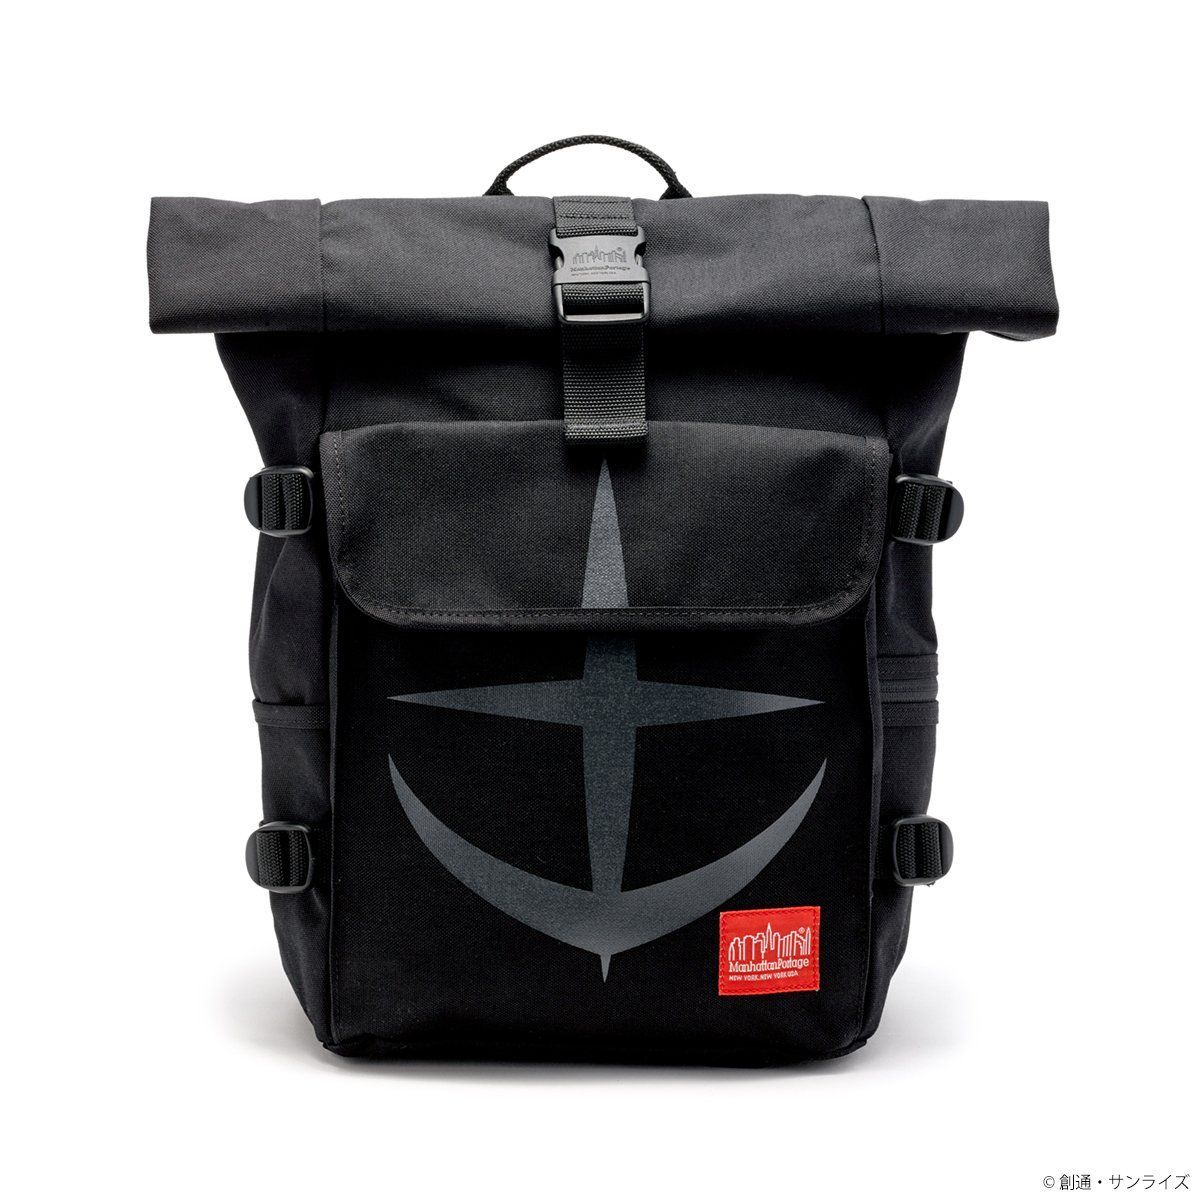 STRICT-G x Manhattan Portage "Mobile Suit Gundam" 40th Anniversary Backpack Earth Federation Forces Model - Black [End of November]